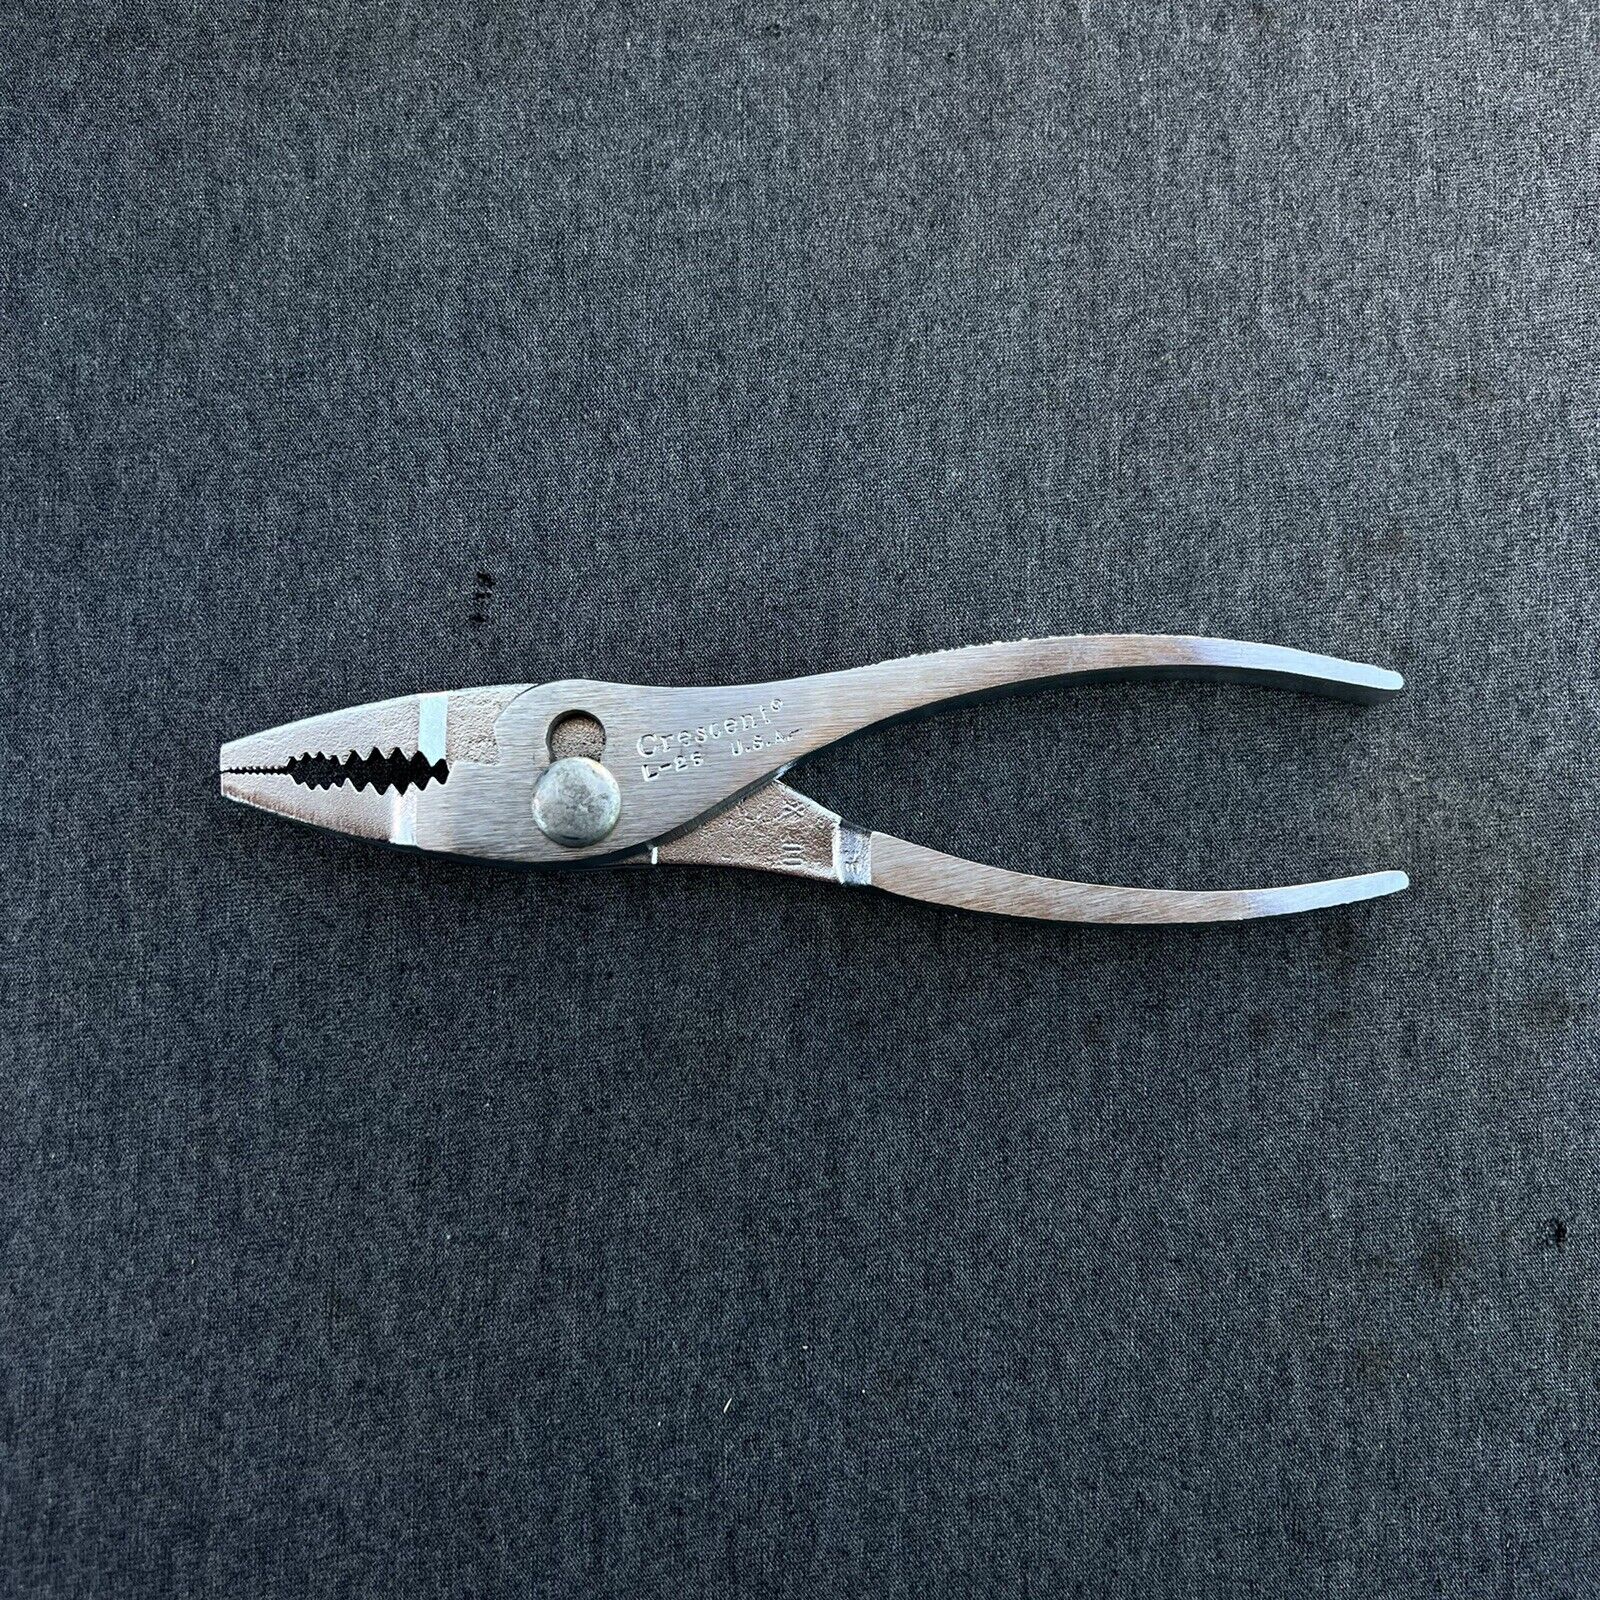 Vintage Crescent Tool Co. L26 Thin Nose Slip Joint Pliers USA